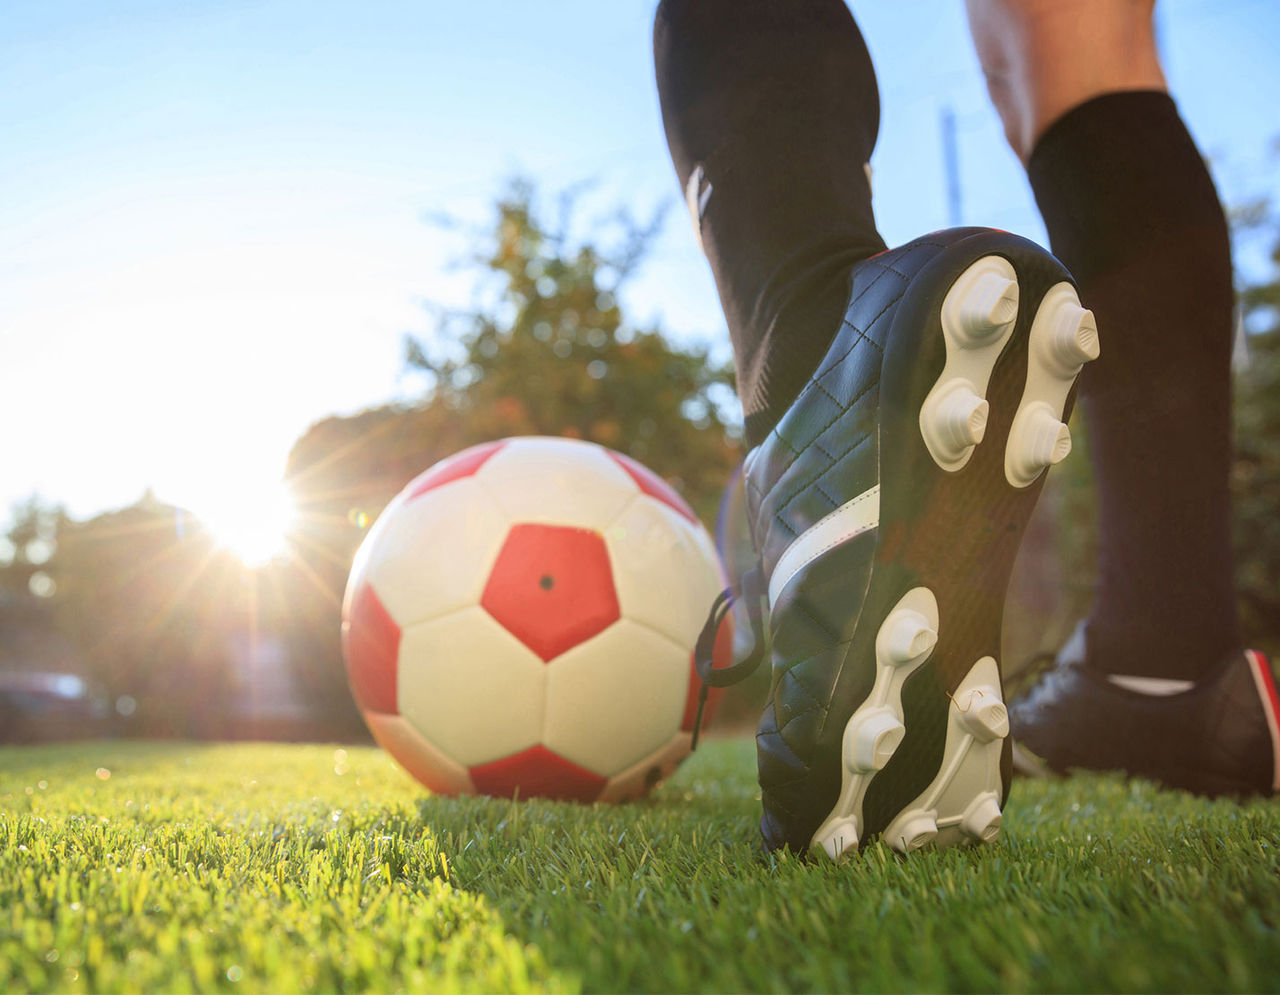 close up of soccer player's foot about to kick soccer ball on field